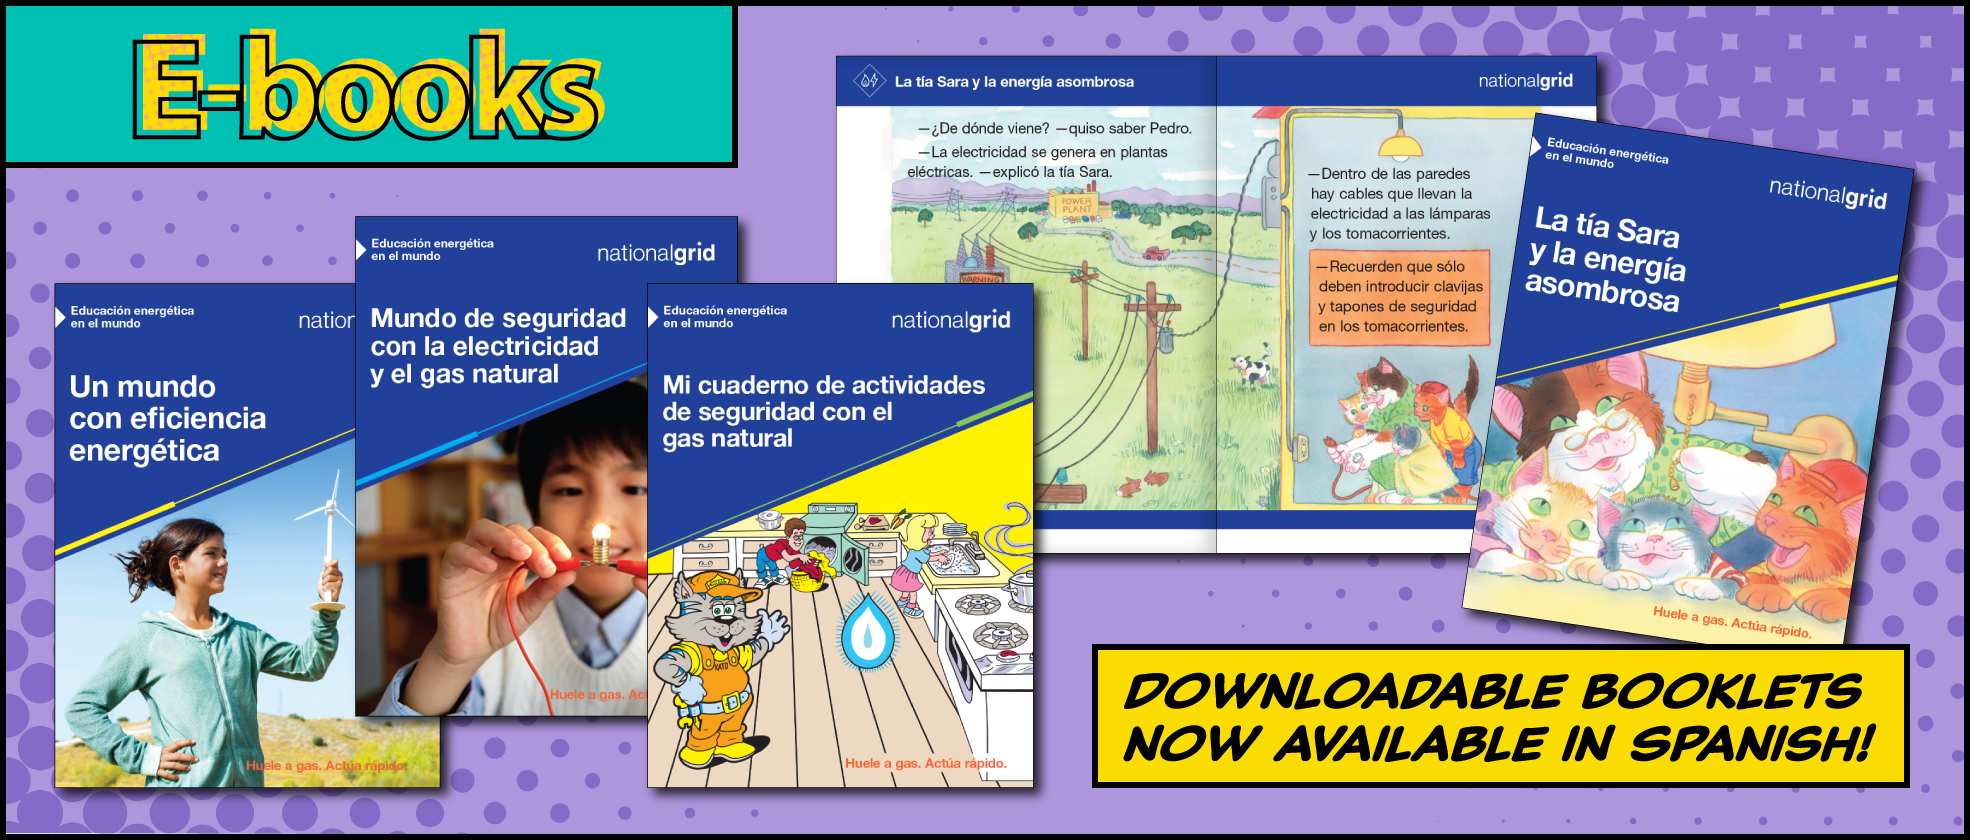 E-books: Downloadable booklets now available in Spanish!